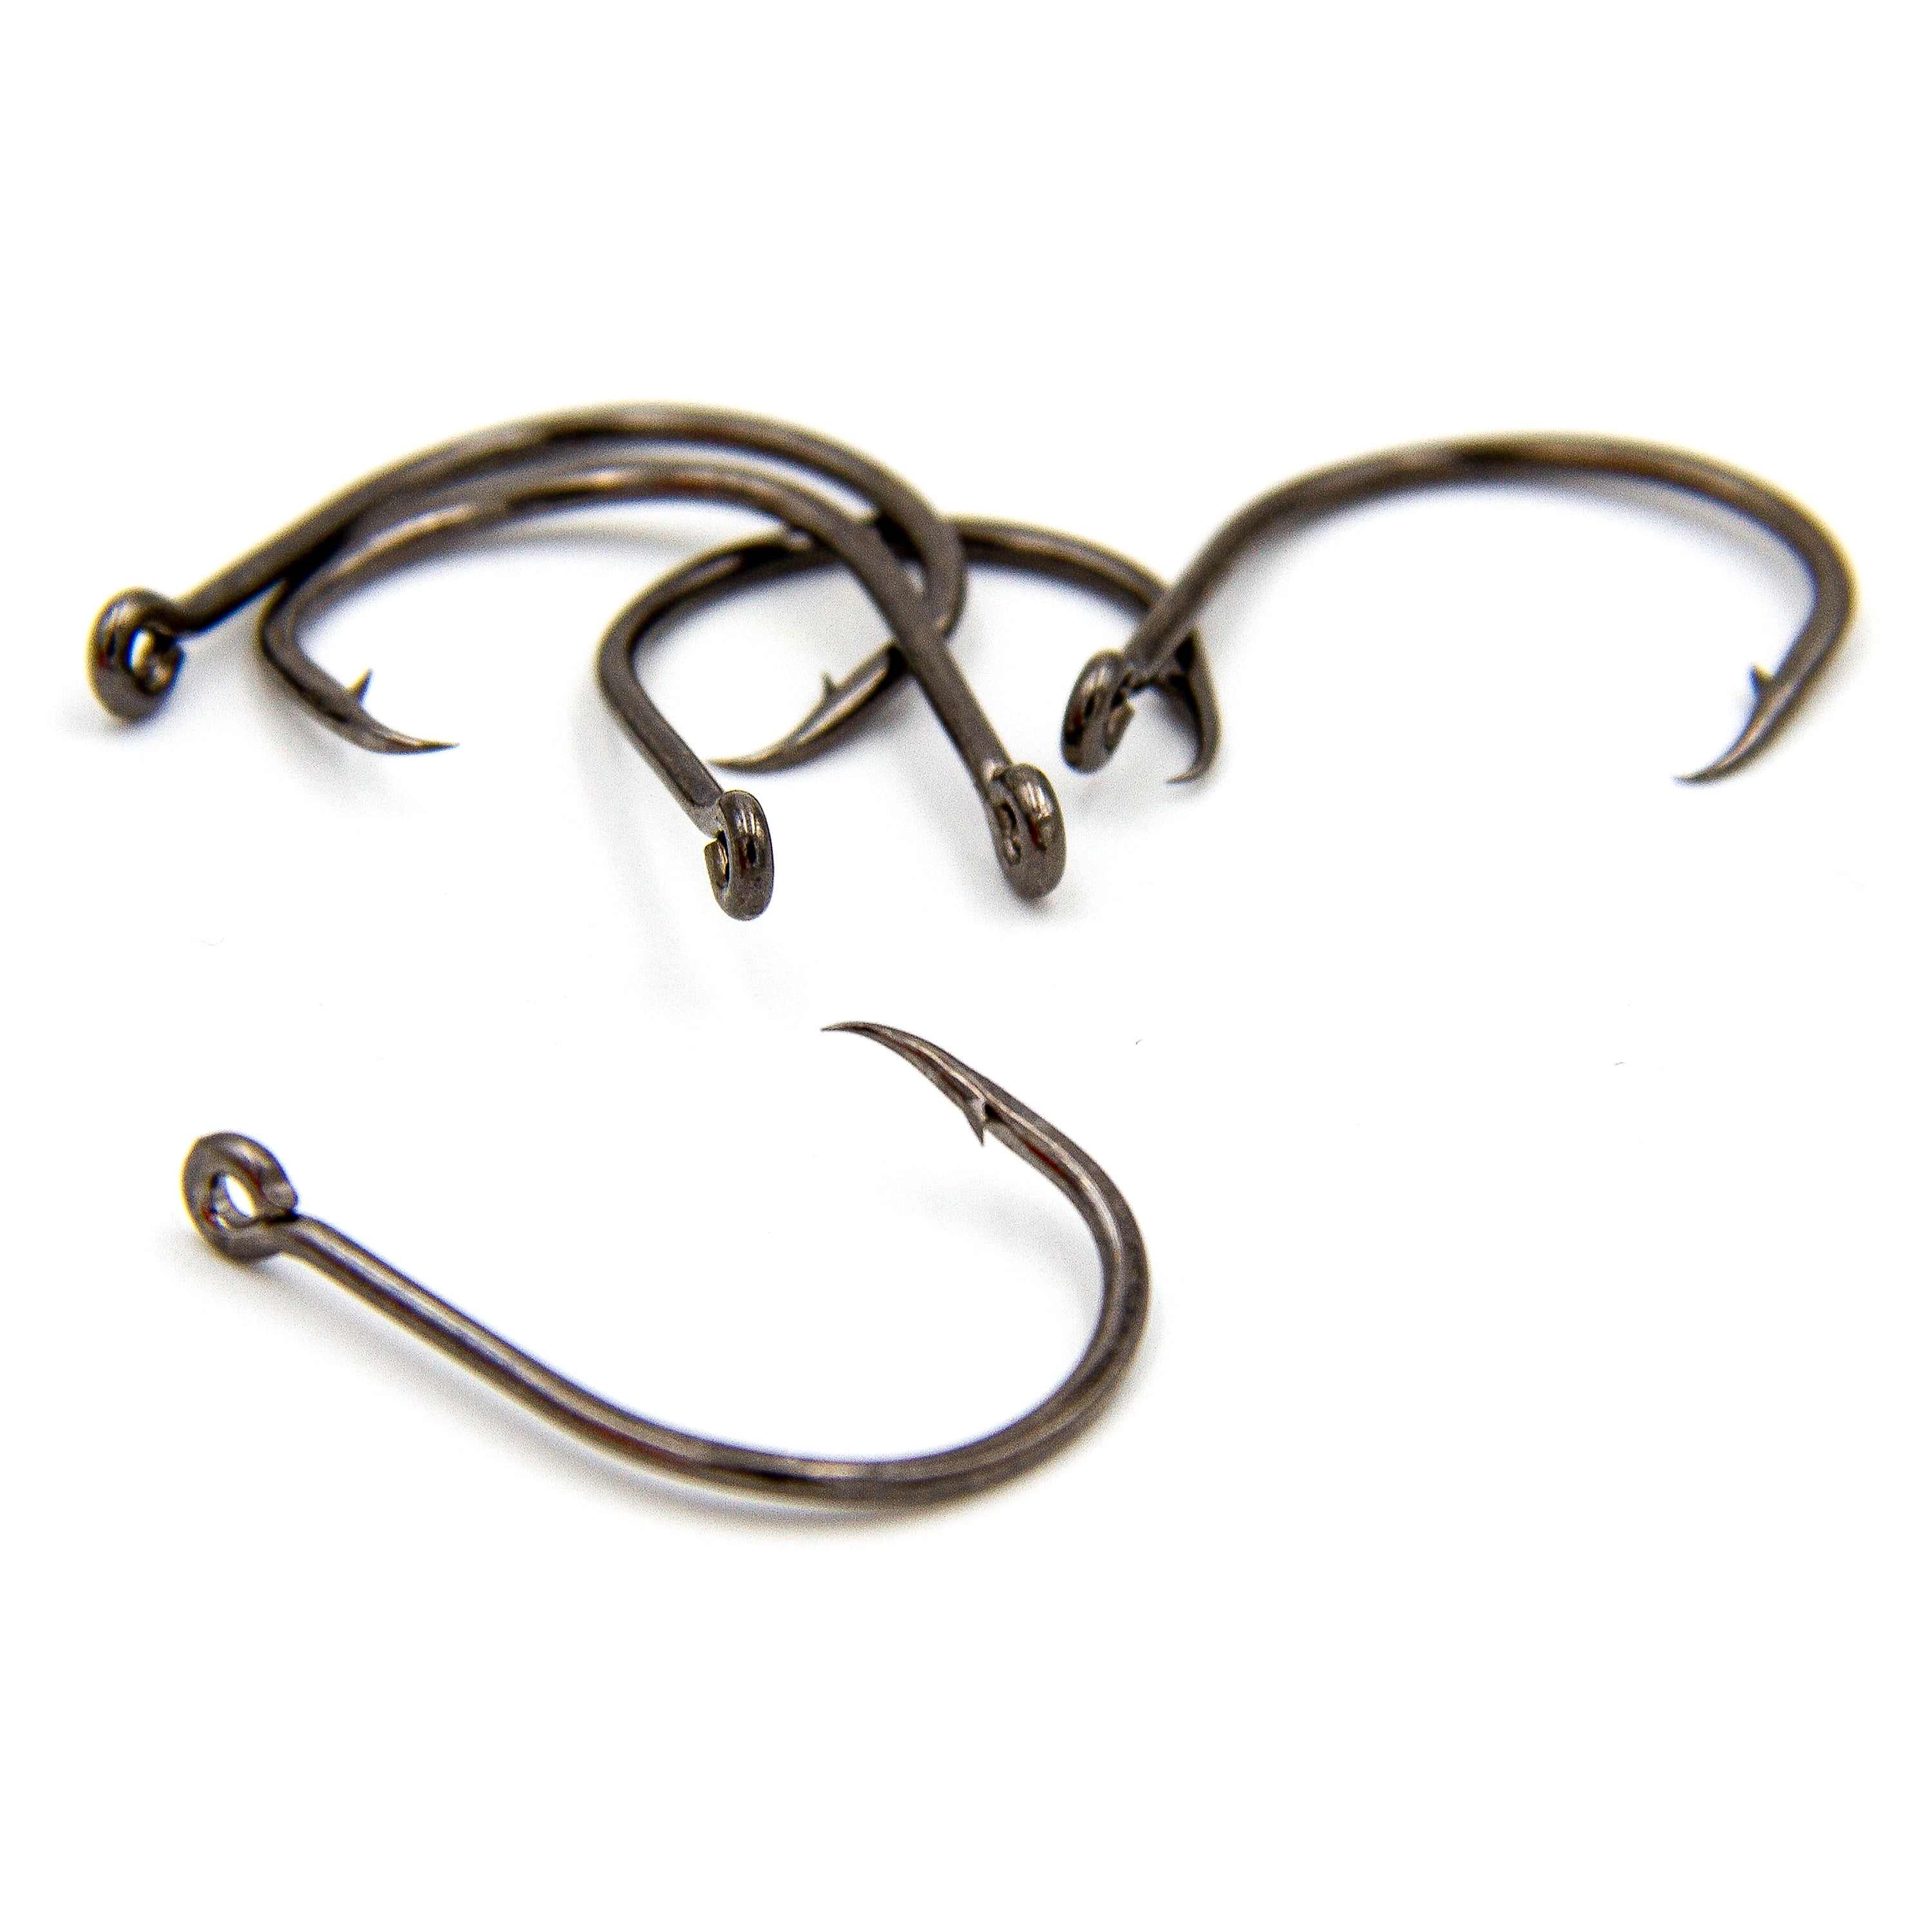 Bait Hooks Have Come 'Full Circle' - Colorado Outdoors Online